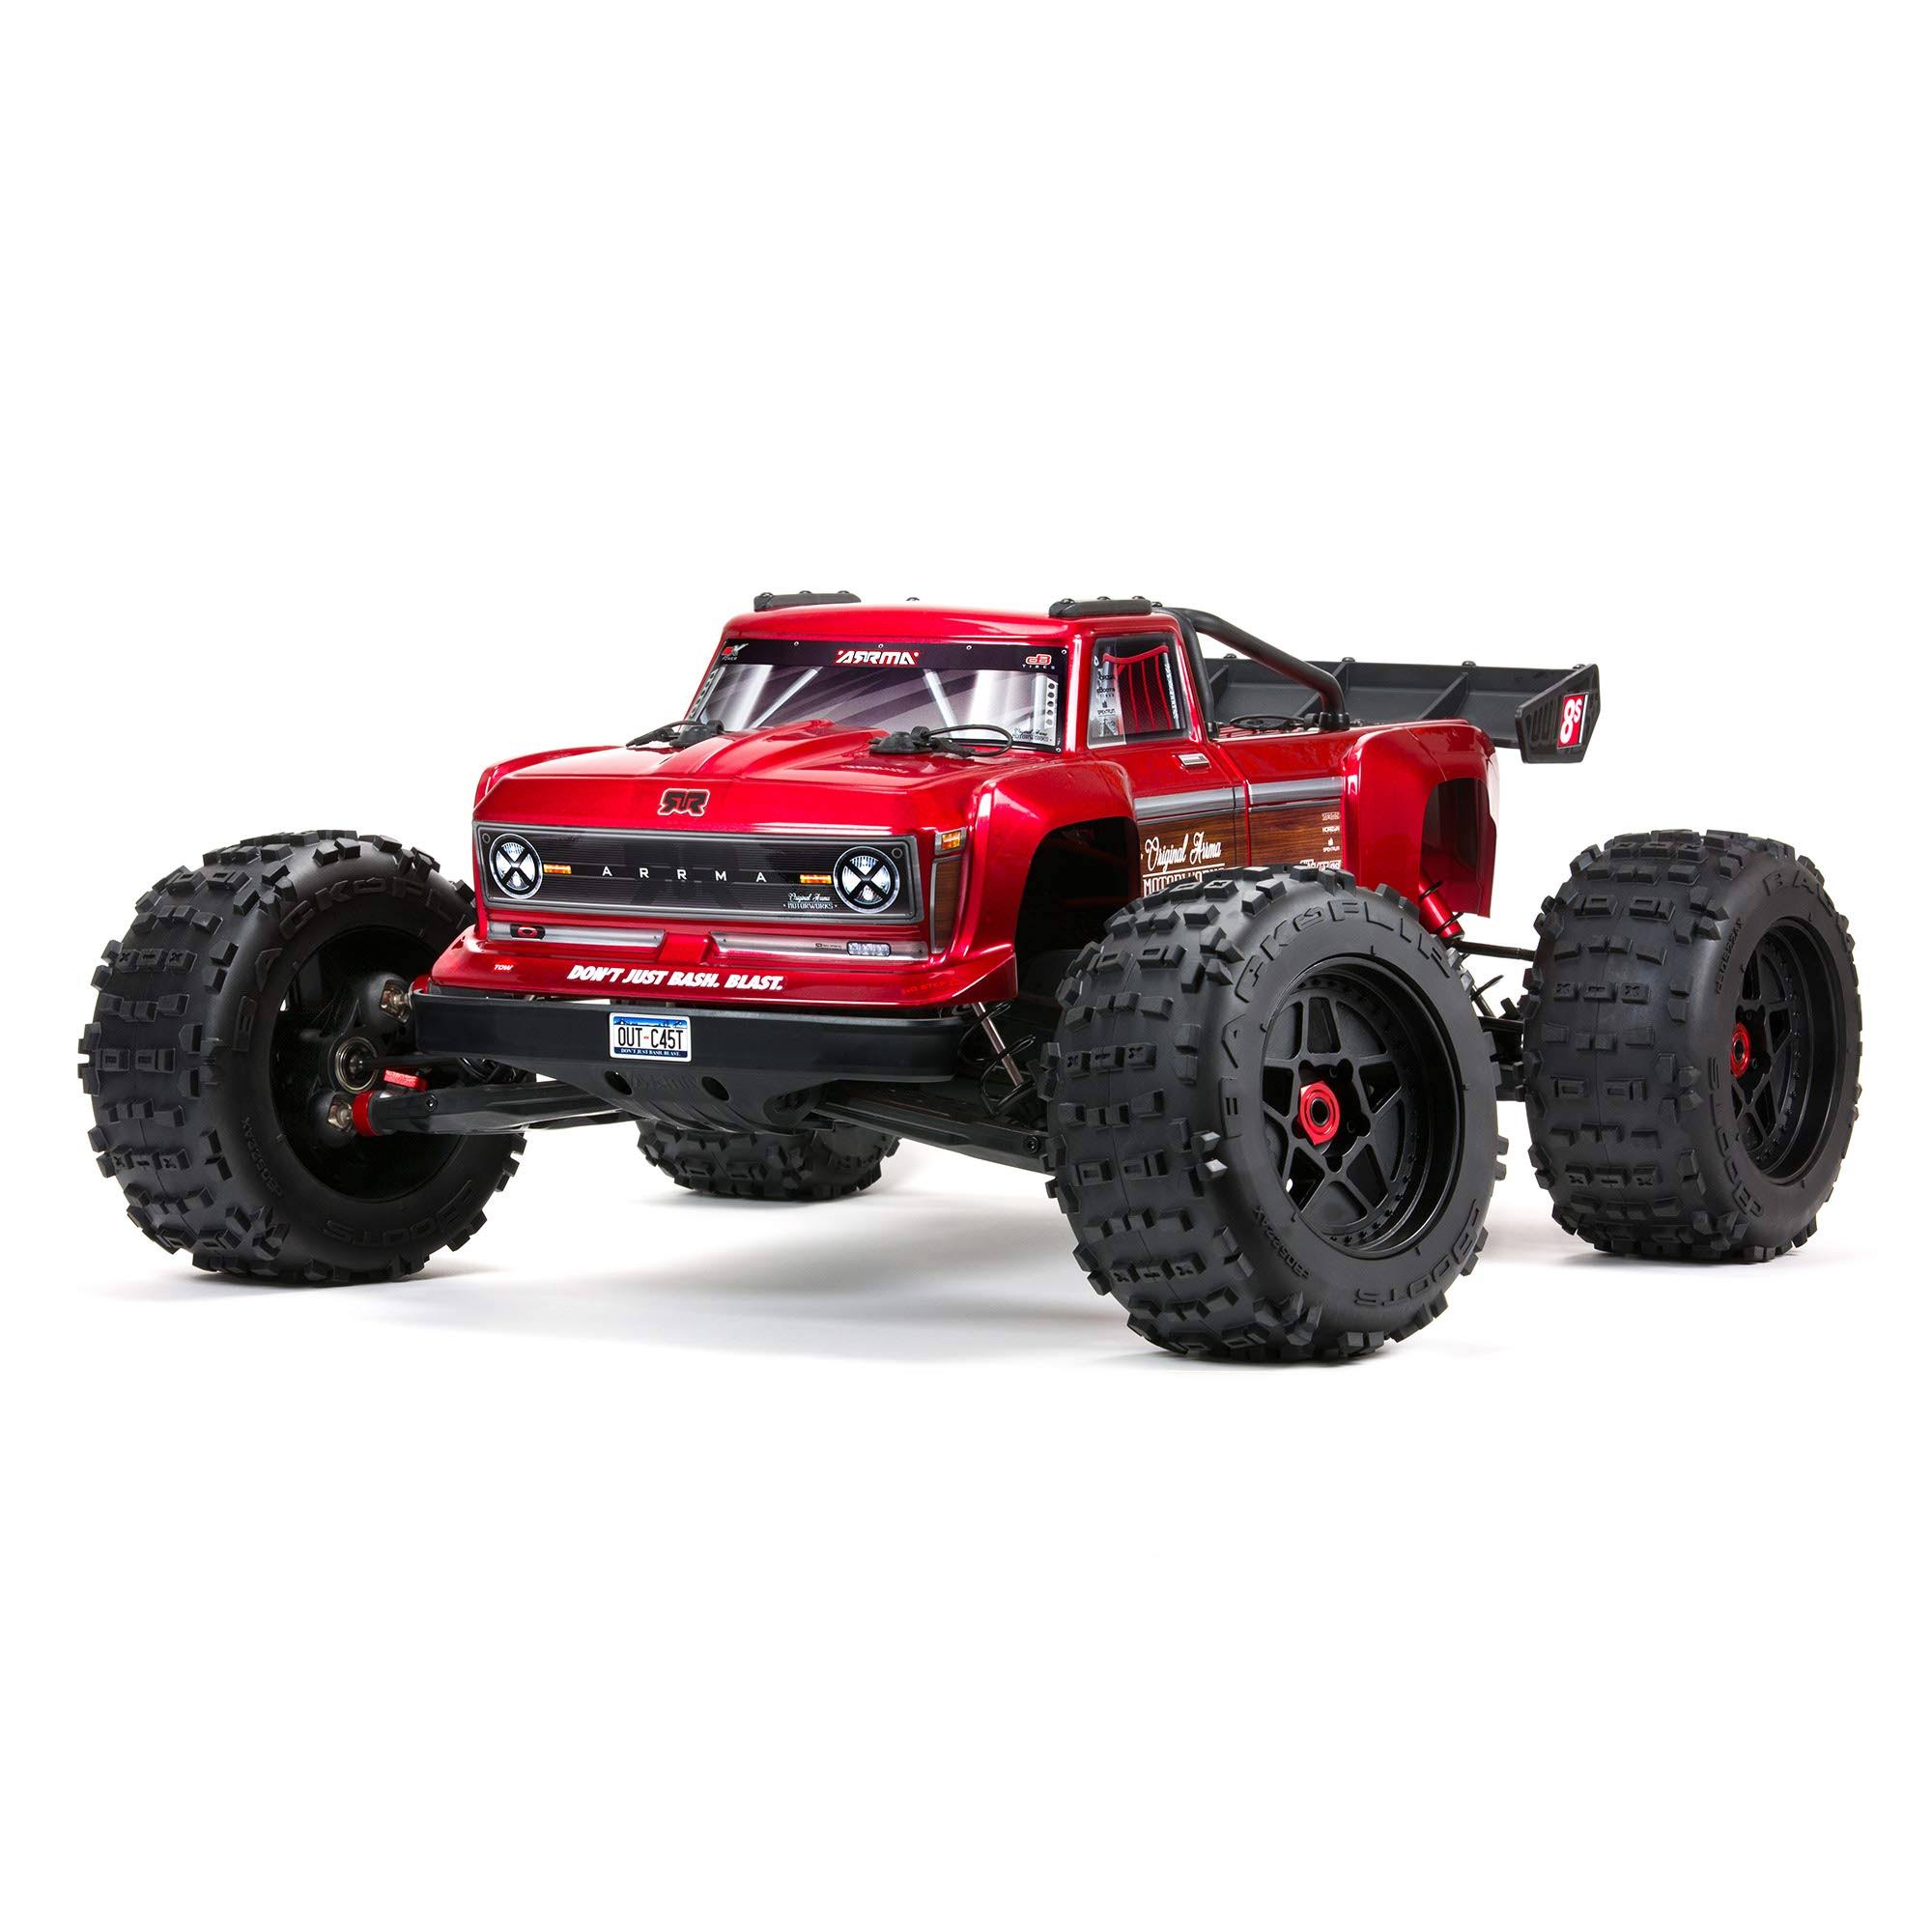 ARRMA RC Truck 1/5 Outcast 4X4 8S BLX Stunt Truck RTR (Ready-to-Run Transmitter and Receiver Included, Batteries and Charger Required), ARA5810